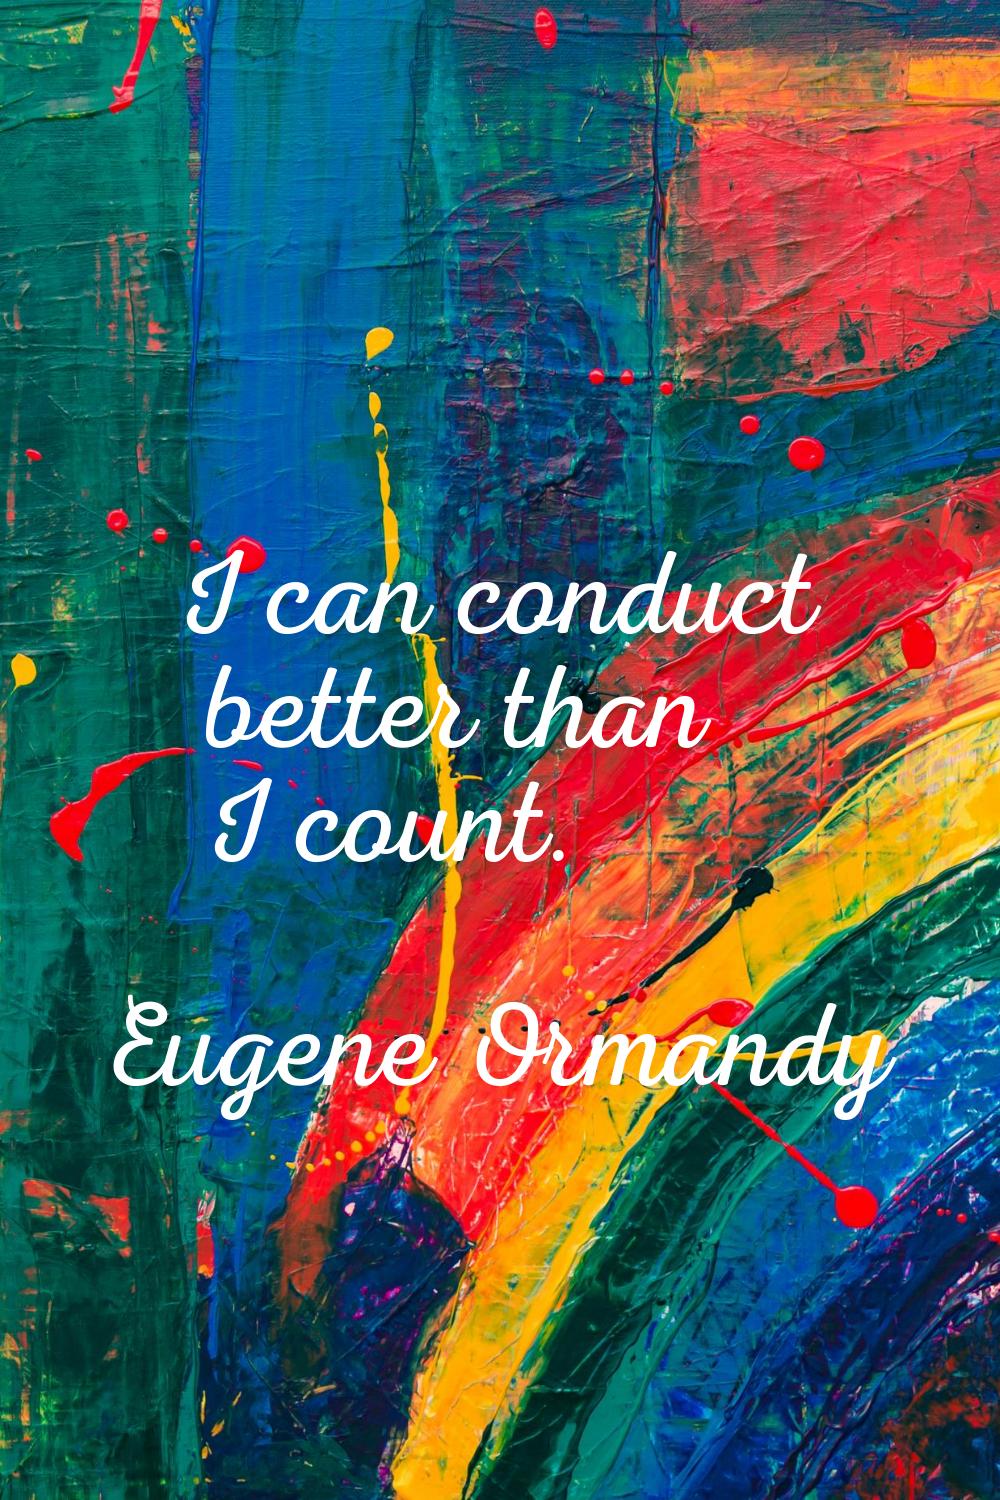 I can conduct better than I count.